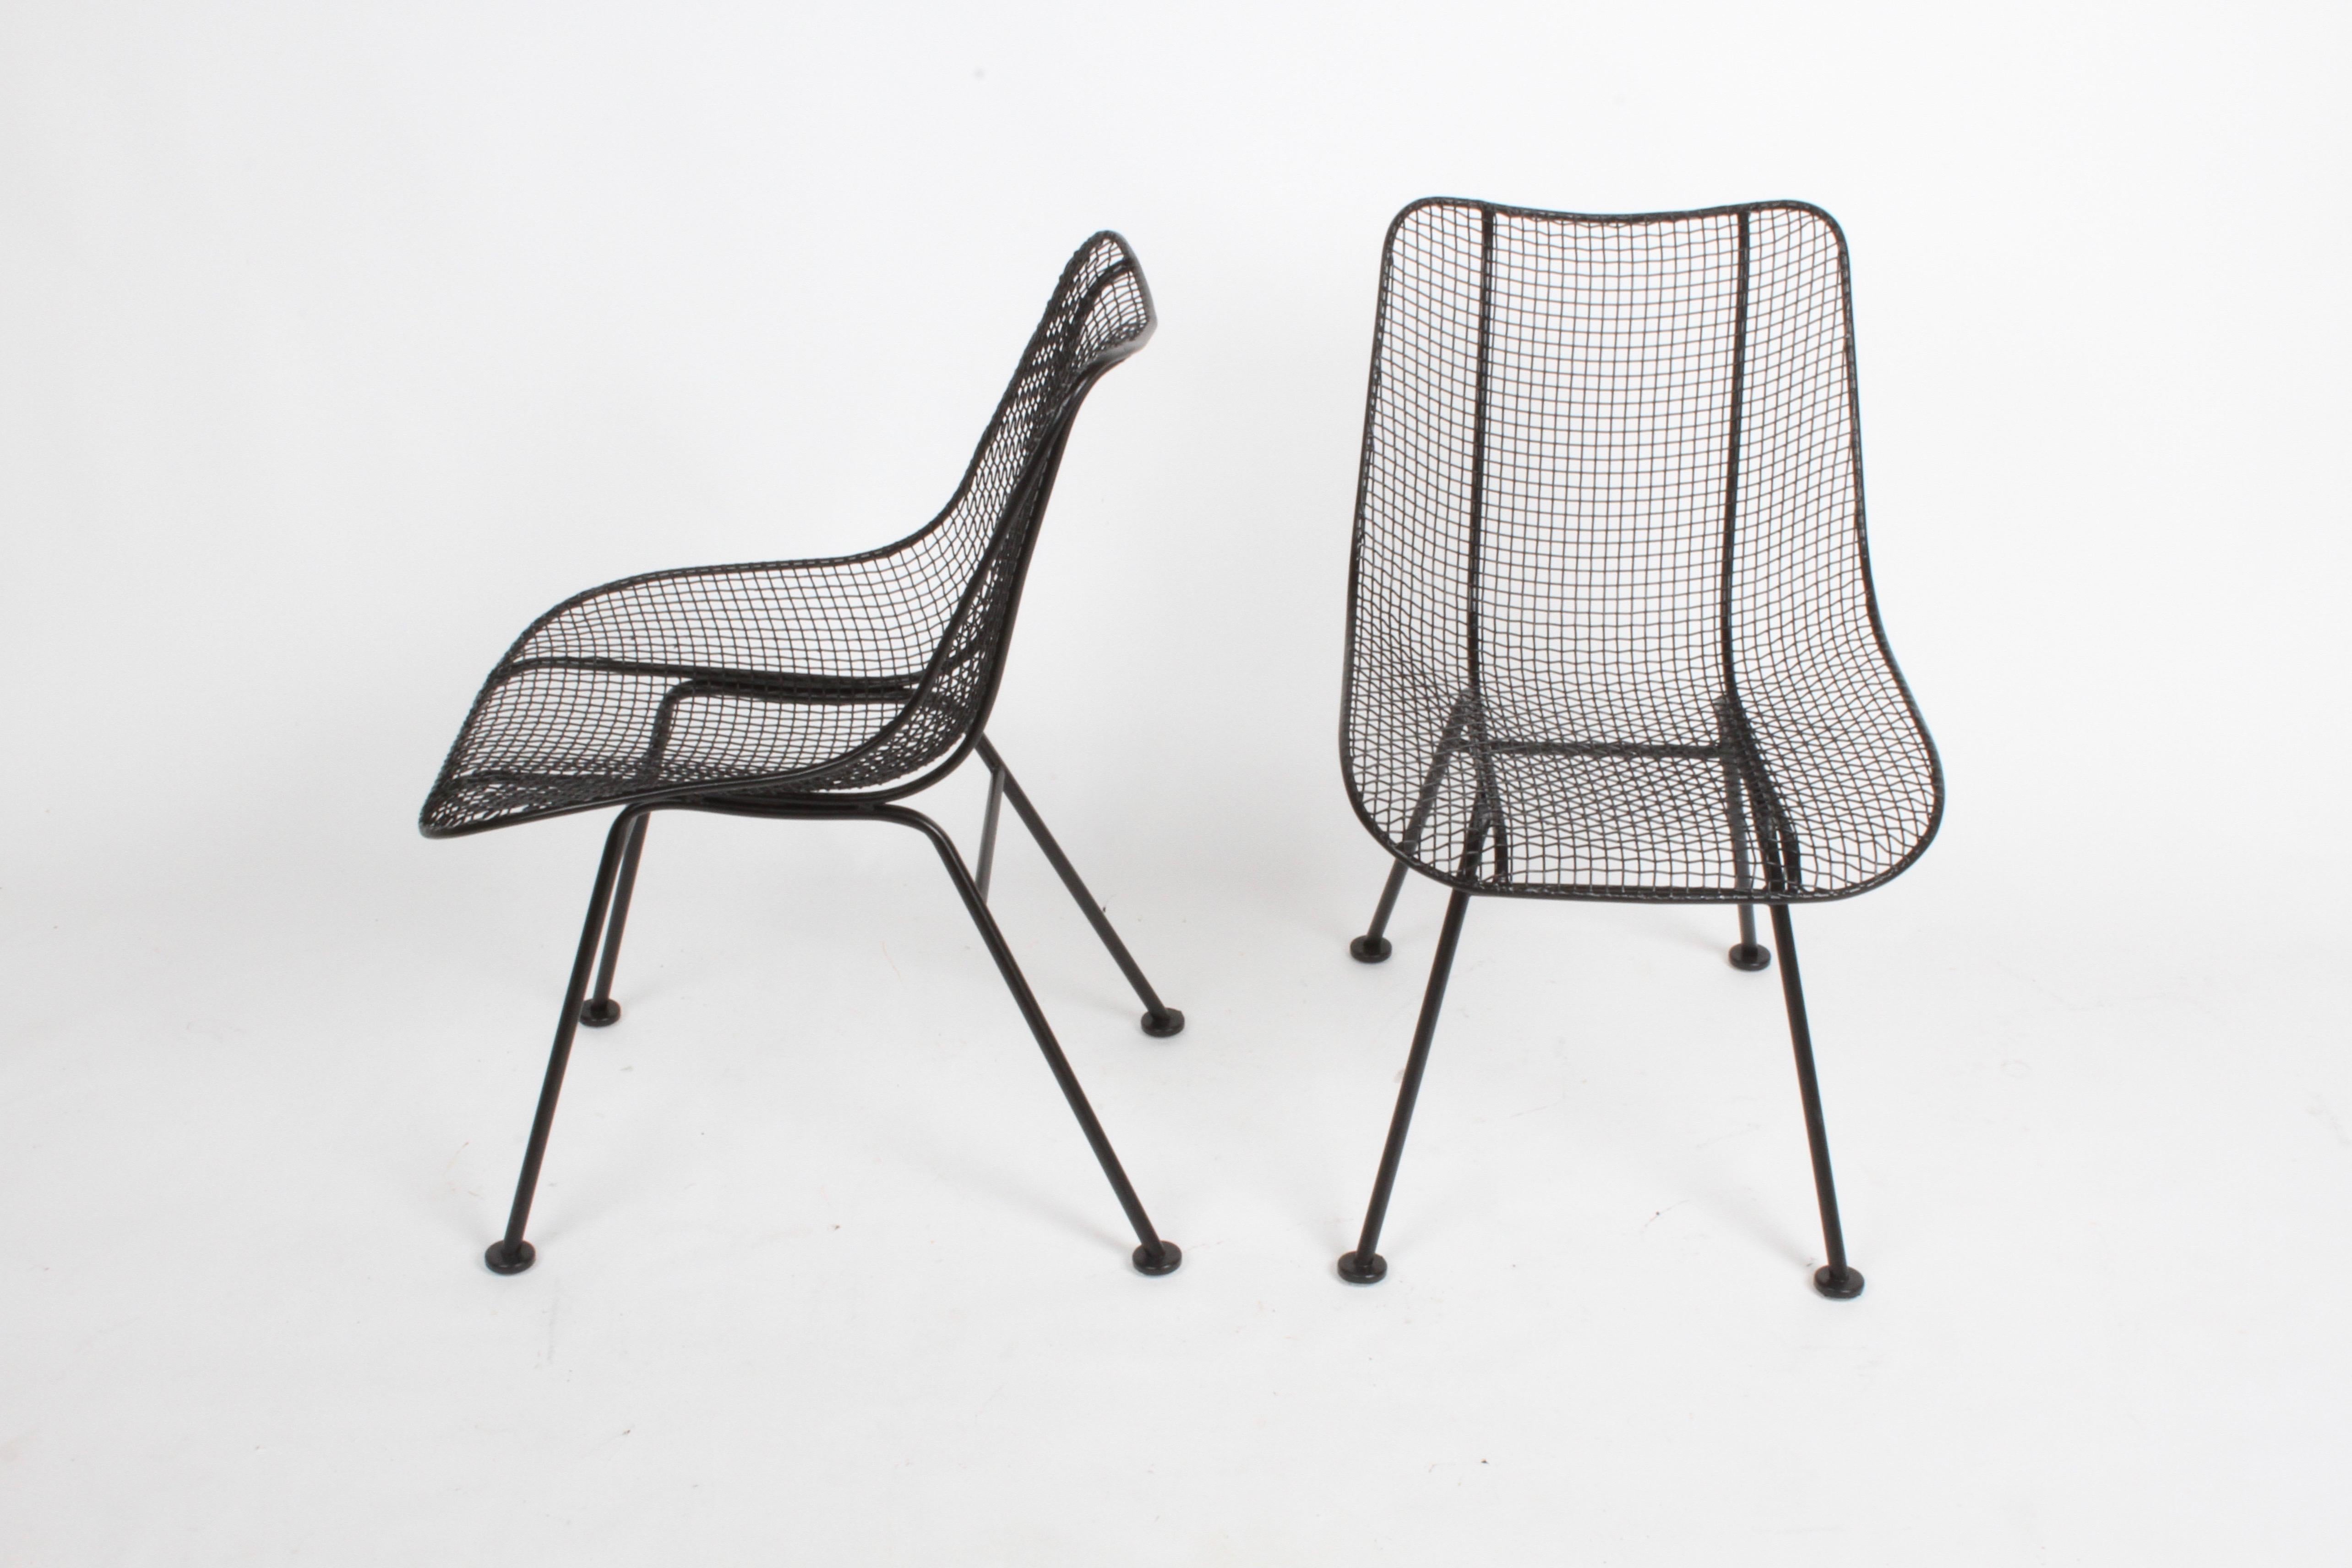 Satin black Woodard sculptura mesh dining chairs, restored condition. Each chairs have been sand blasted, dipped in rust inhibitor primer and painted in satin black. New glides to bottoms of chairs. Listed as single chairs.